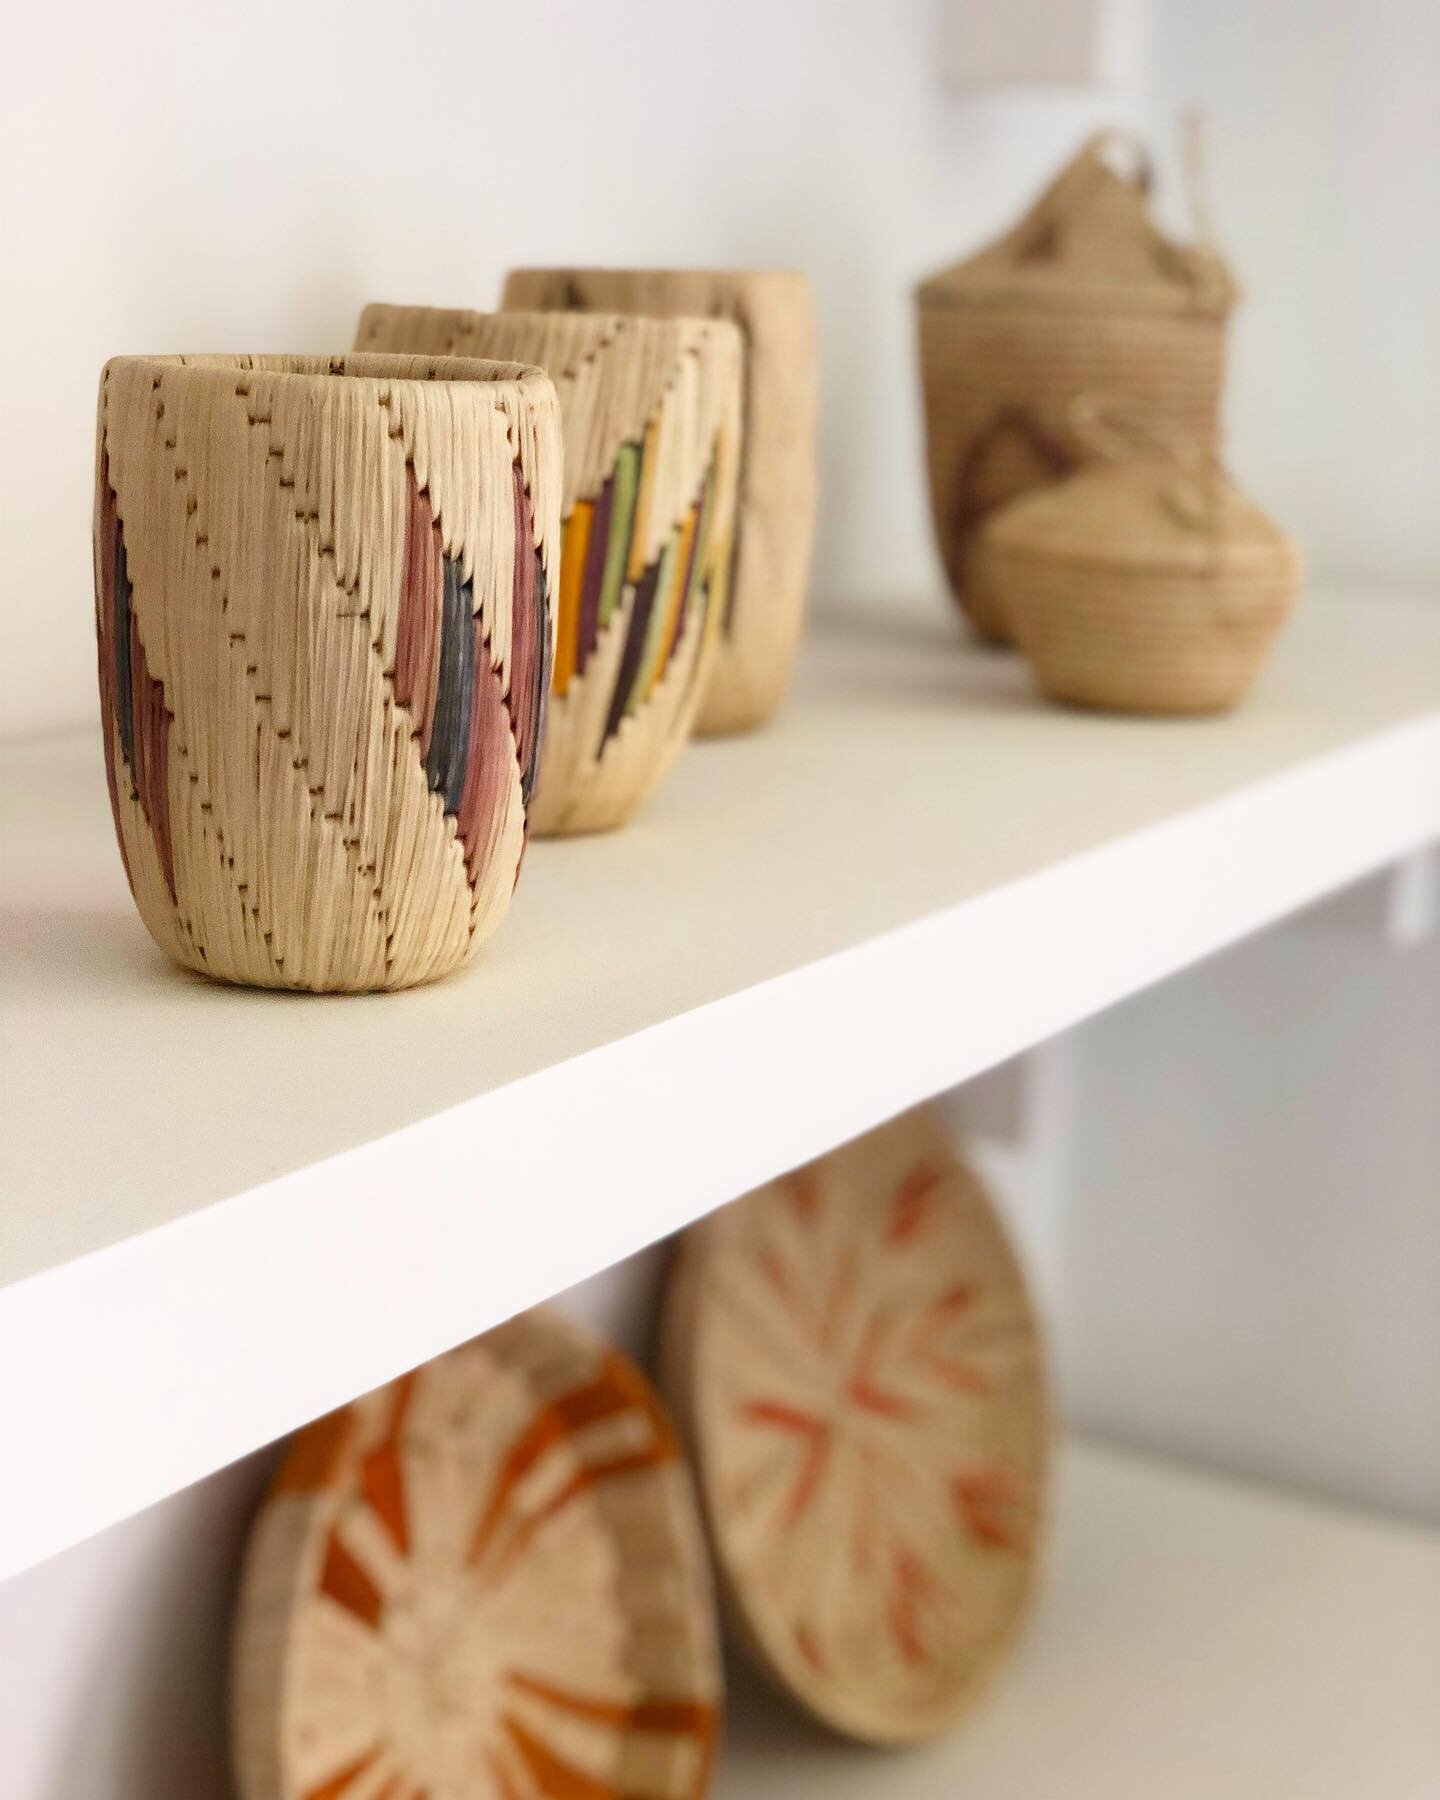 Part of our job at nidu is curating client collections and art pieces. Here we staged a collection of baskets made by the Warao natives of the Orinoco Delta region for a family home in Venezuela. 
.
.
.

#interiordesign #design #interior #architectur